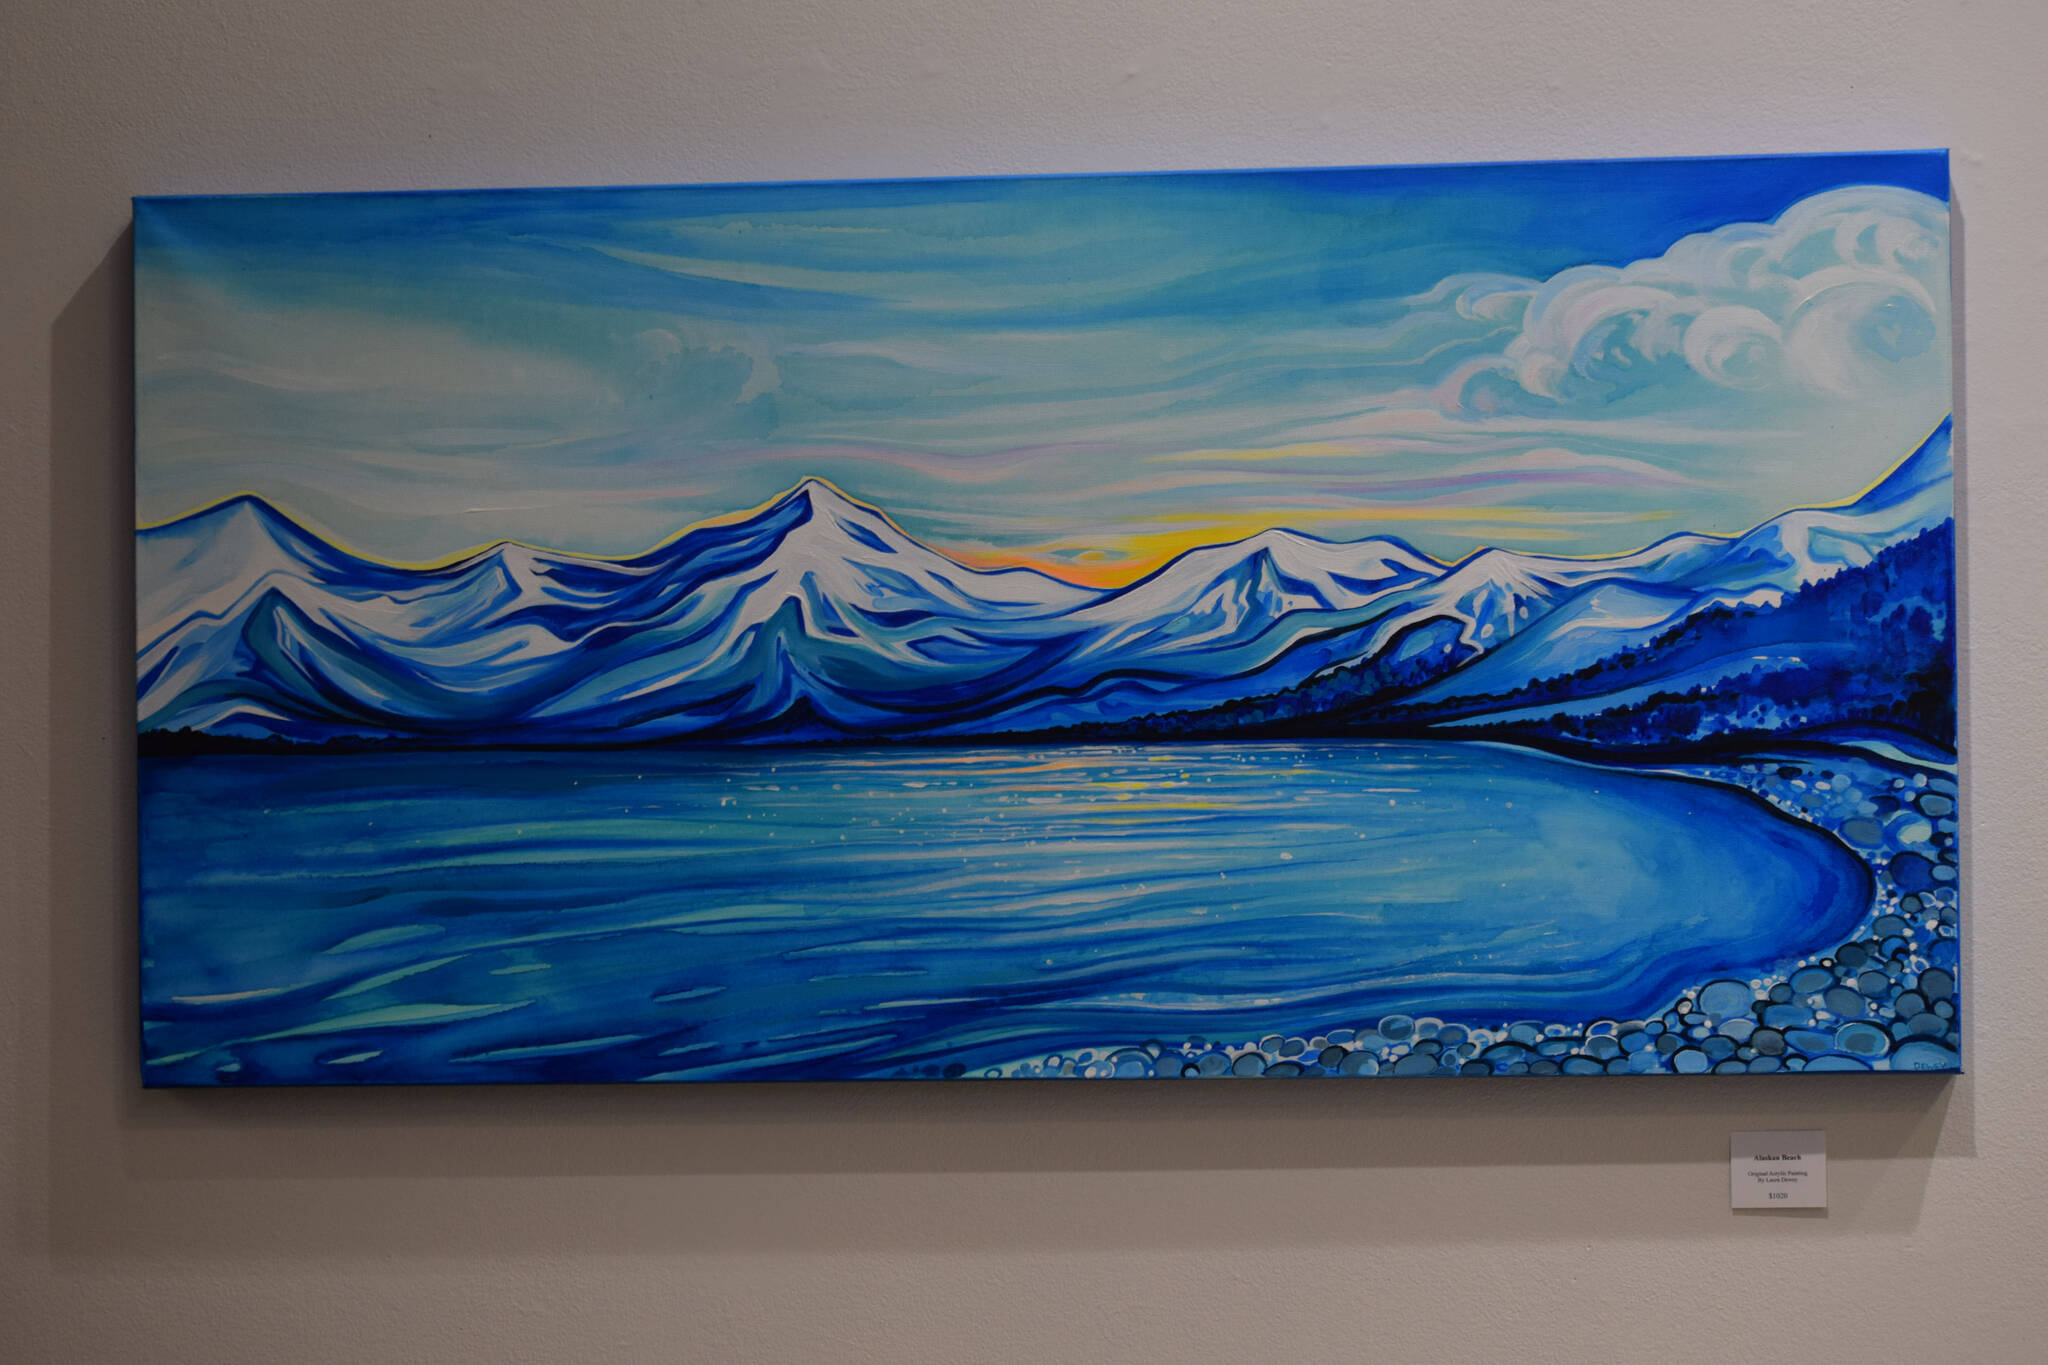 Laura Dewey’s art is on display at the Kenai Chamber of Commerce and Visitor Center on Wednesday, Jan. 19, 2022. (Camille Botello/Peninsula Clarion)